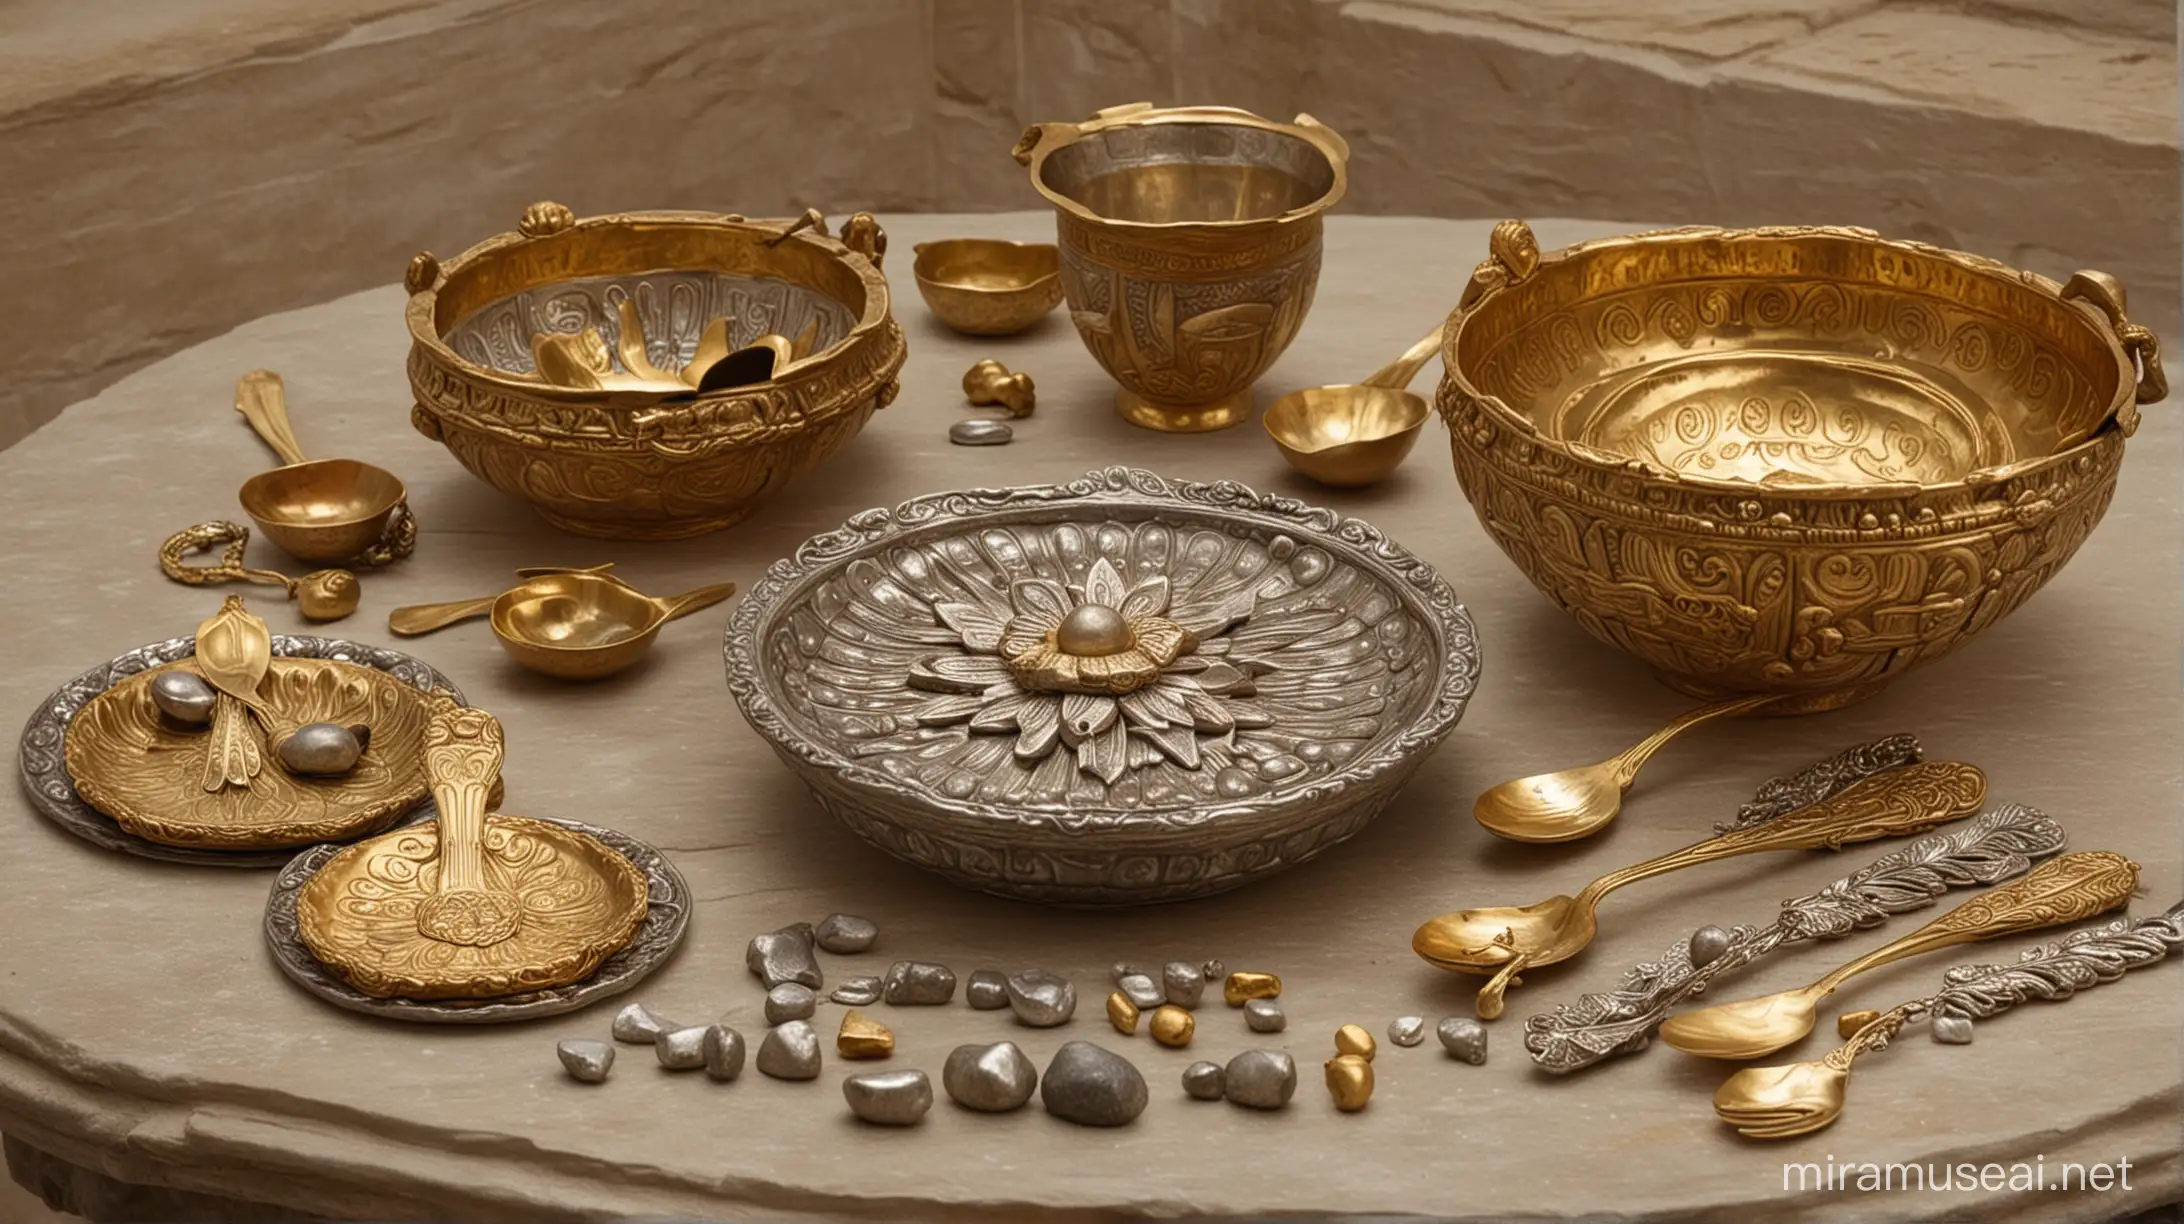 Gold and silver spoons, gold and silver bowls, an Ornate stone alter, a jewish temple in the era of moses